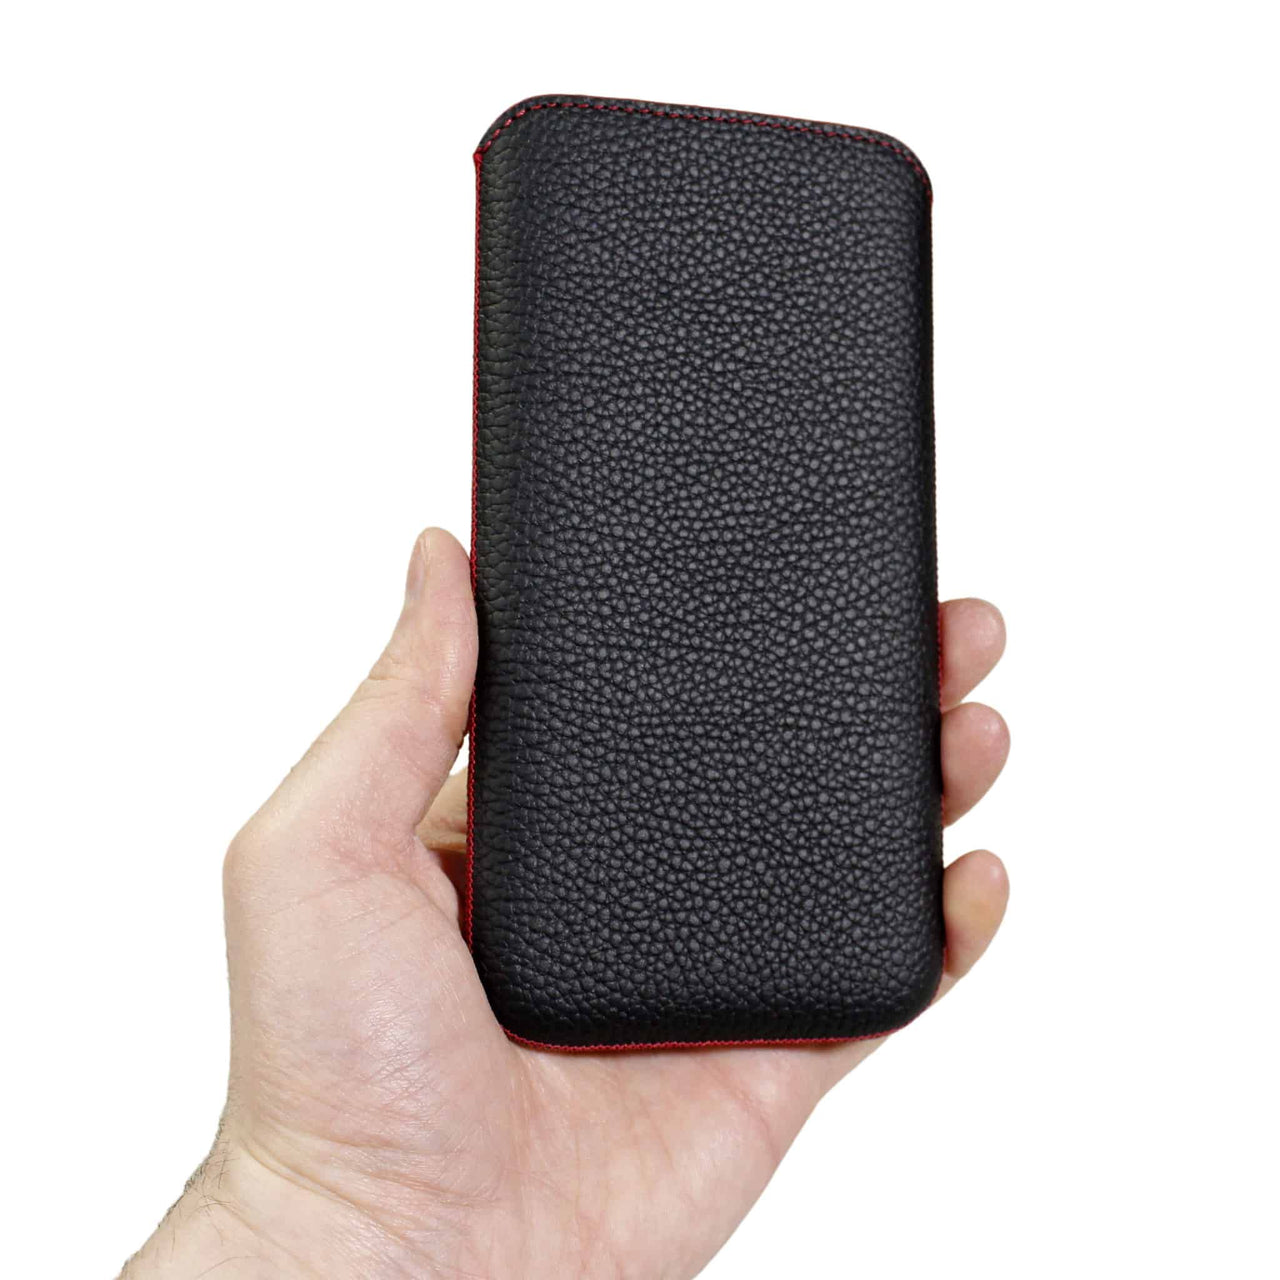 iPhone 11 Pro Max Genuine Leather Pouch Sleeve Case | Artisanpouch